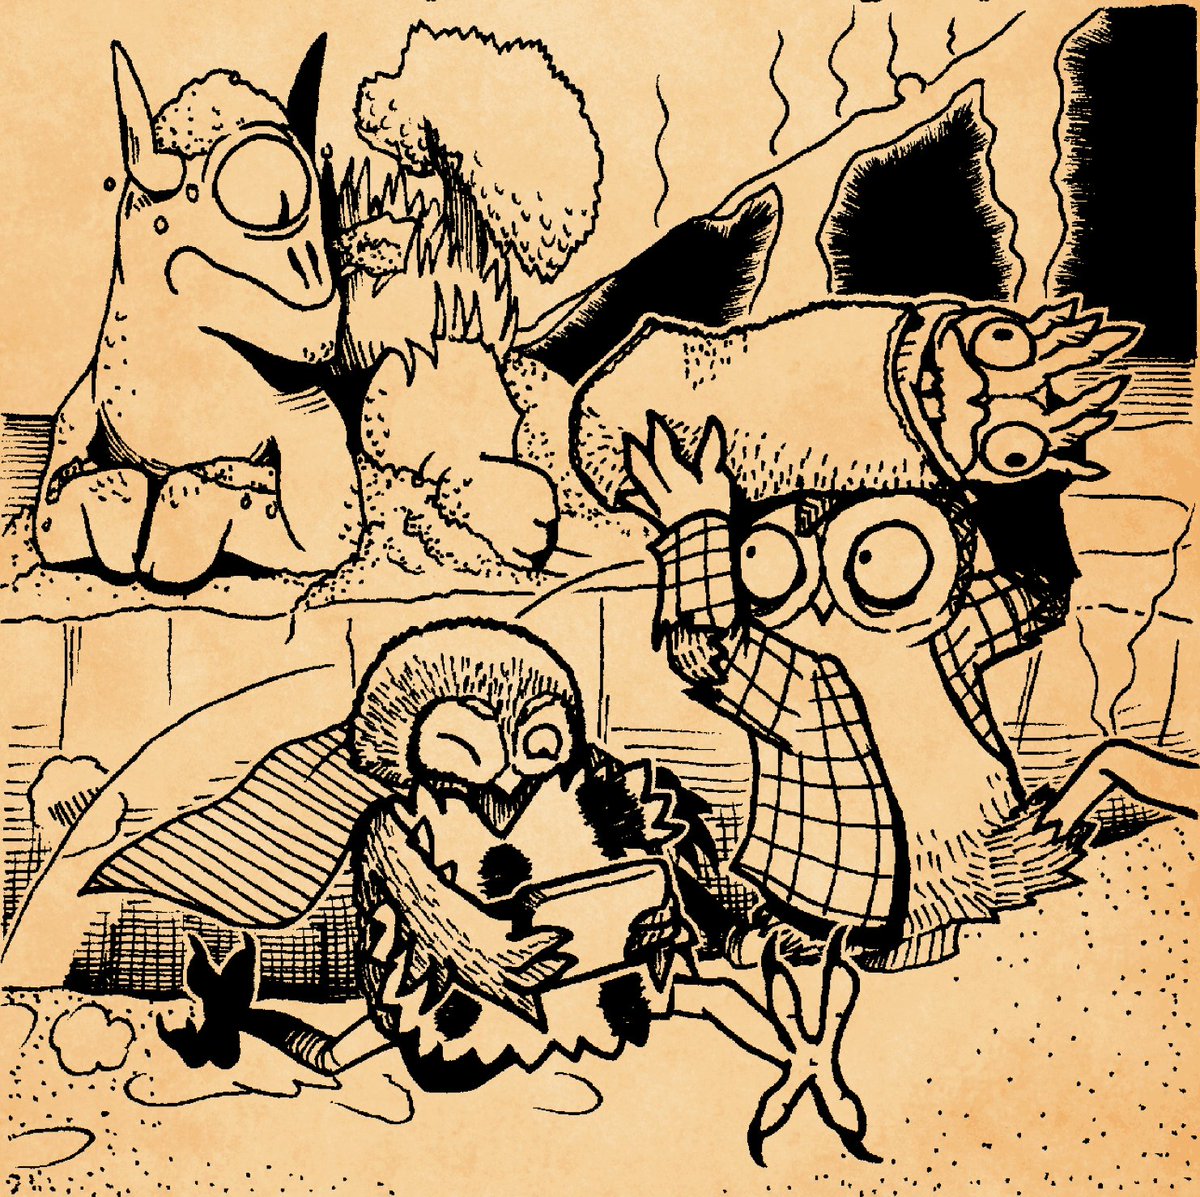 Nowadays Realm of Owls strips have more structured story arcs, but silliness continues! Follow the authors into the Twisted Keep and witness their reports about its mind-twisting floors. They meet many weird, wacko and Cacko characters. While escaping back home!